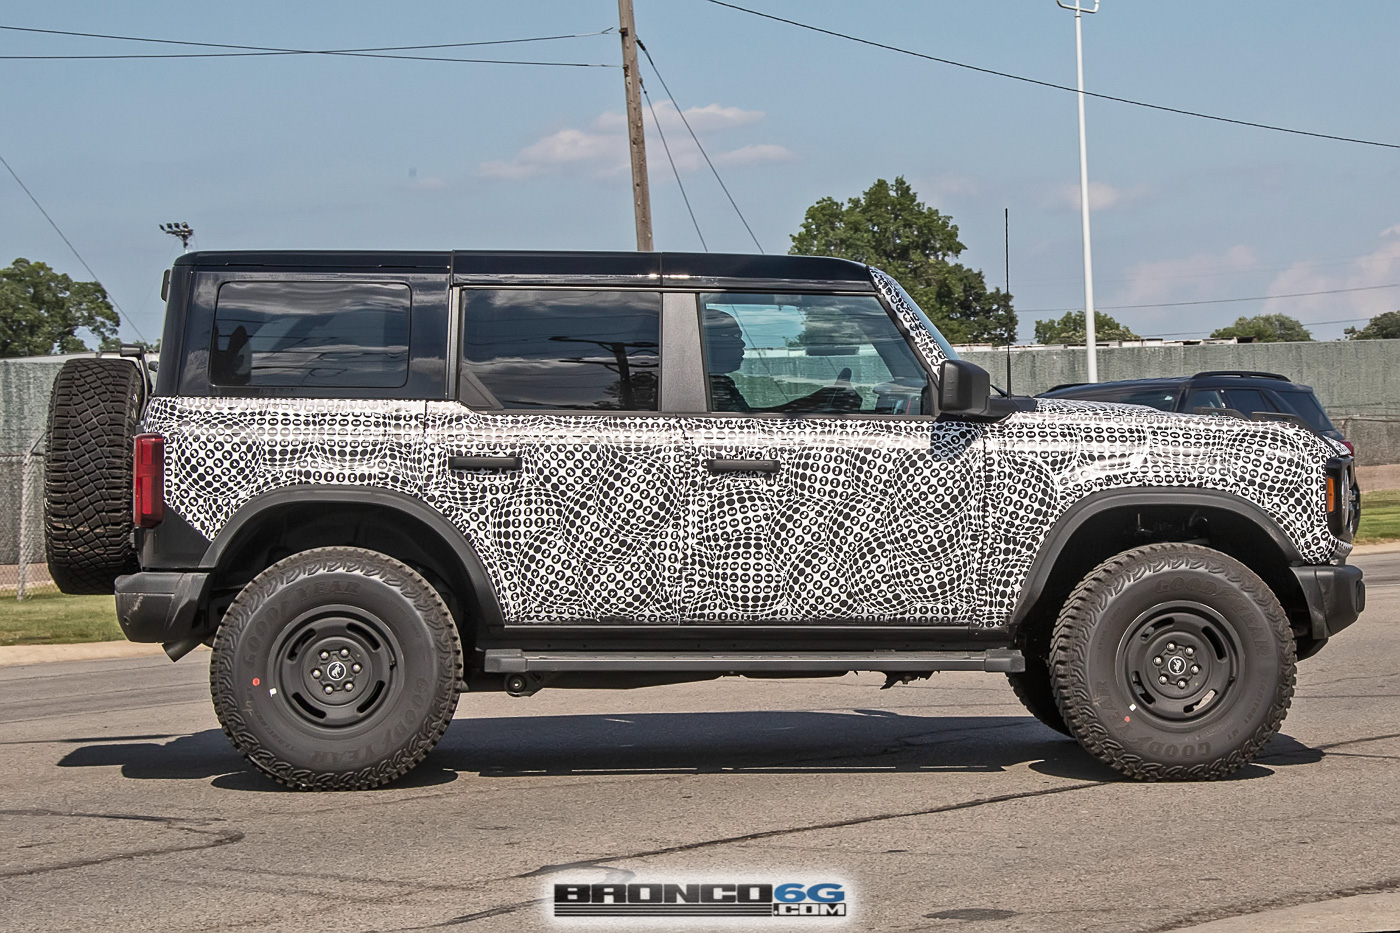 Ford Bronco Bronco Heritage Edition Spied Wearing MOD Top, Squared Flares, Retro Grille, Robins Egg Blue! ford-gt-gul